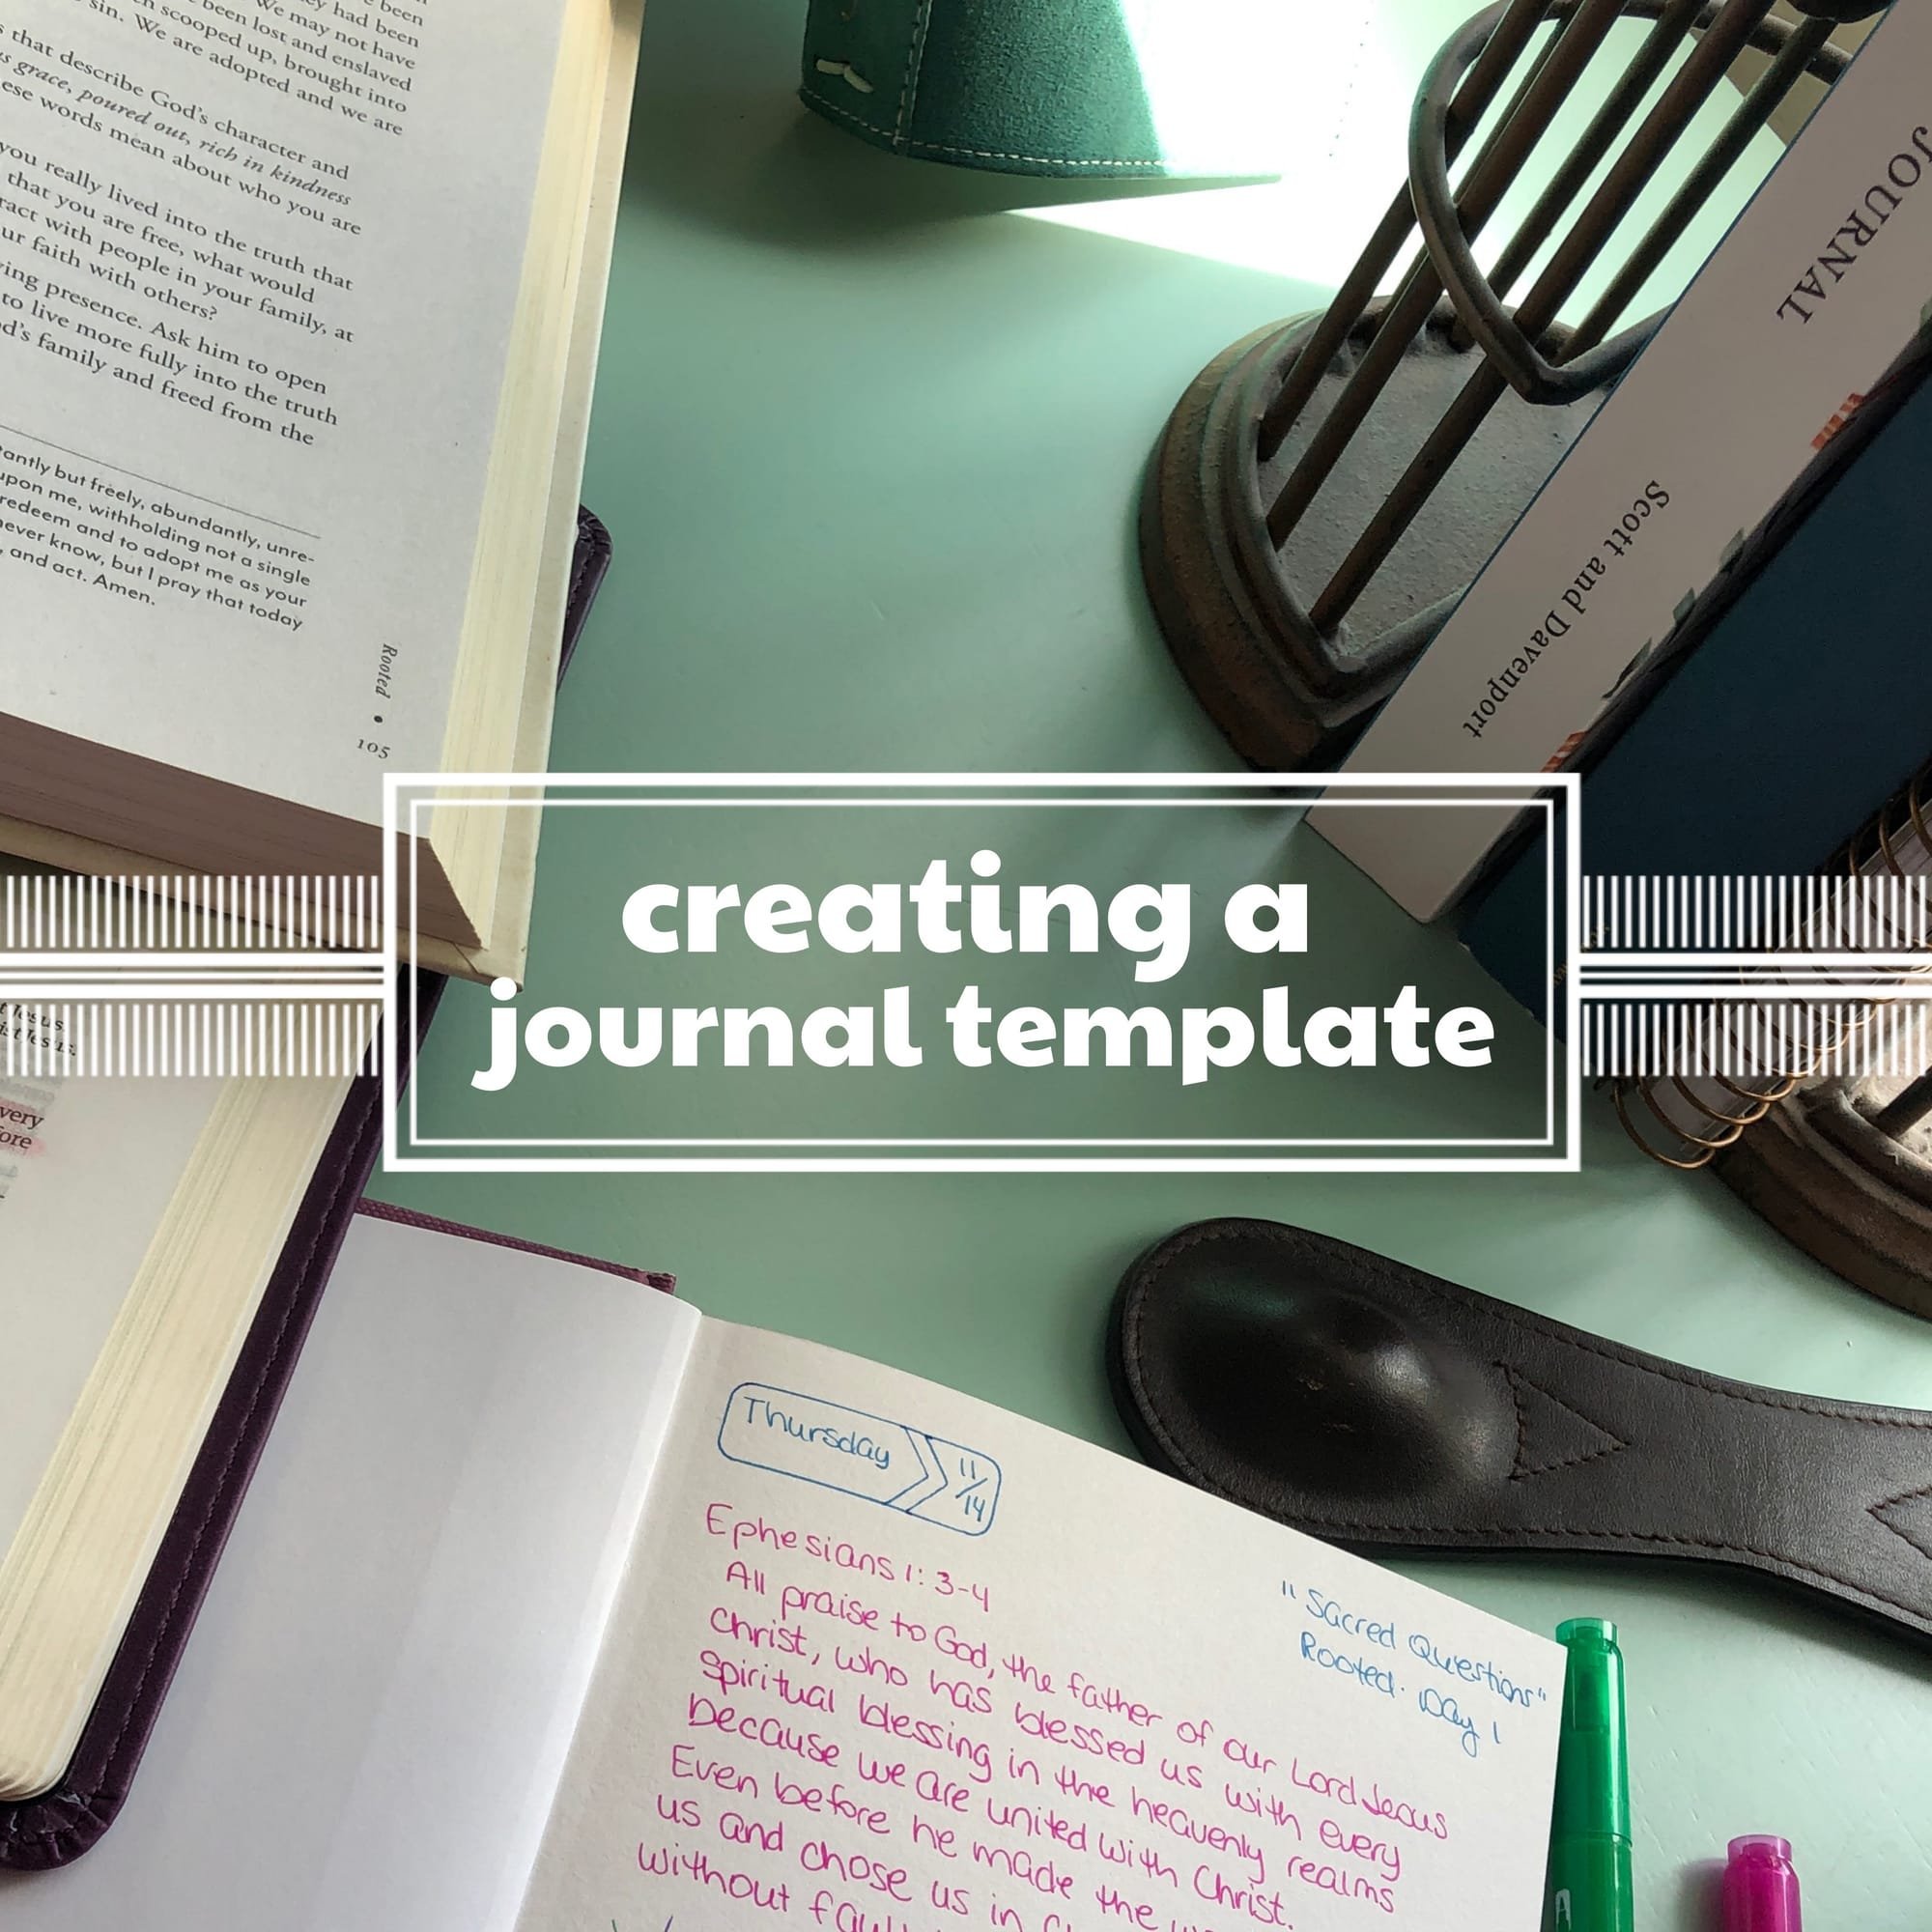 Creating a Journal Template